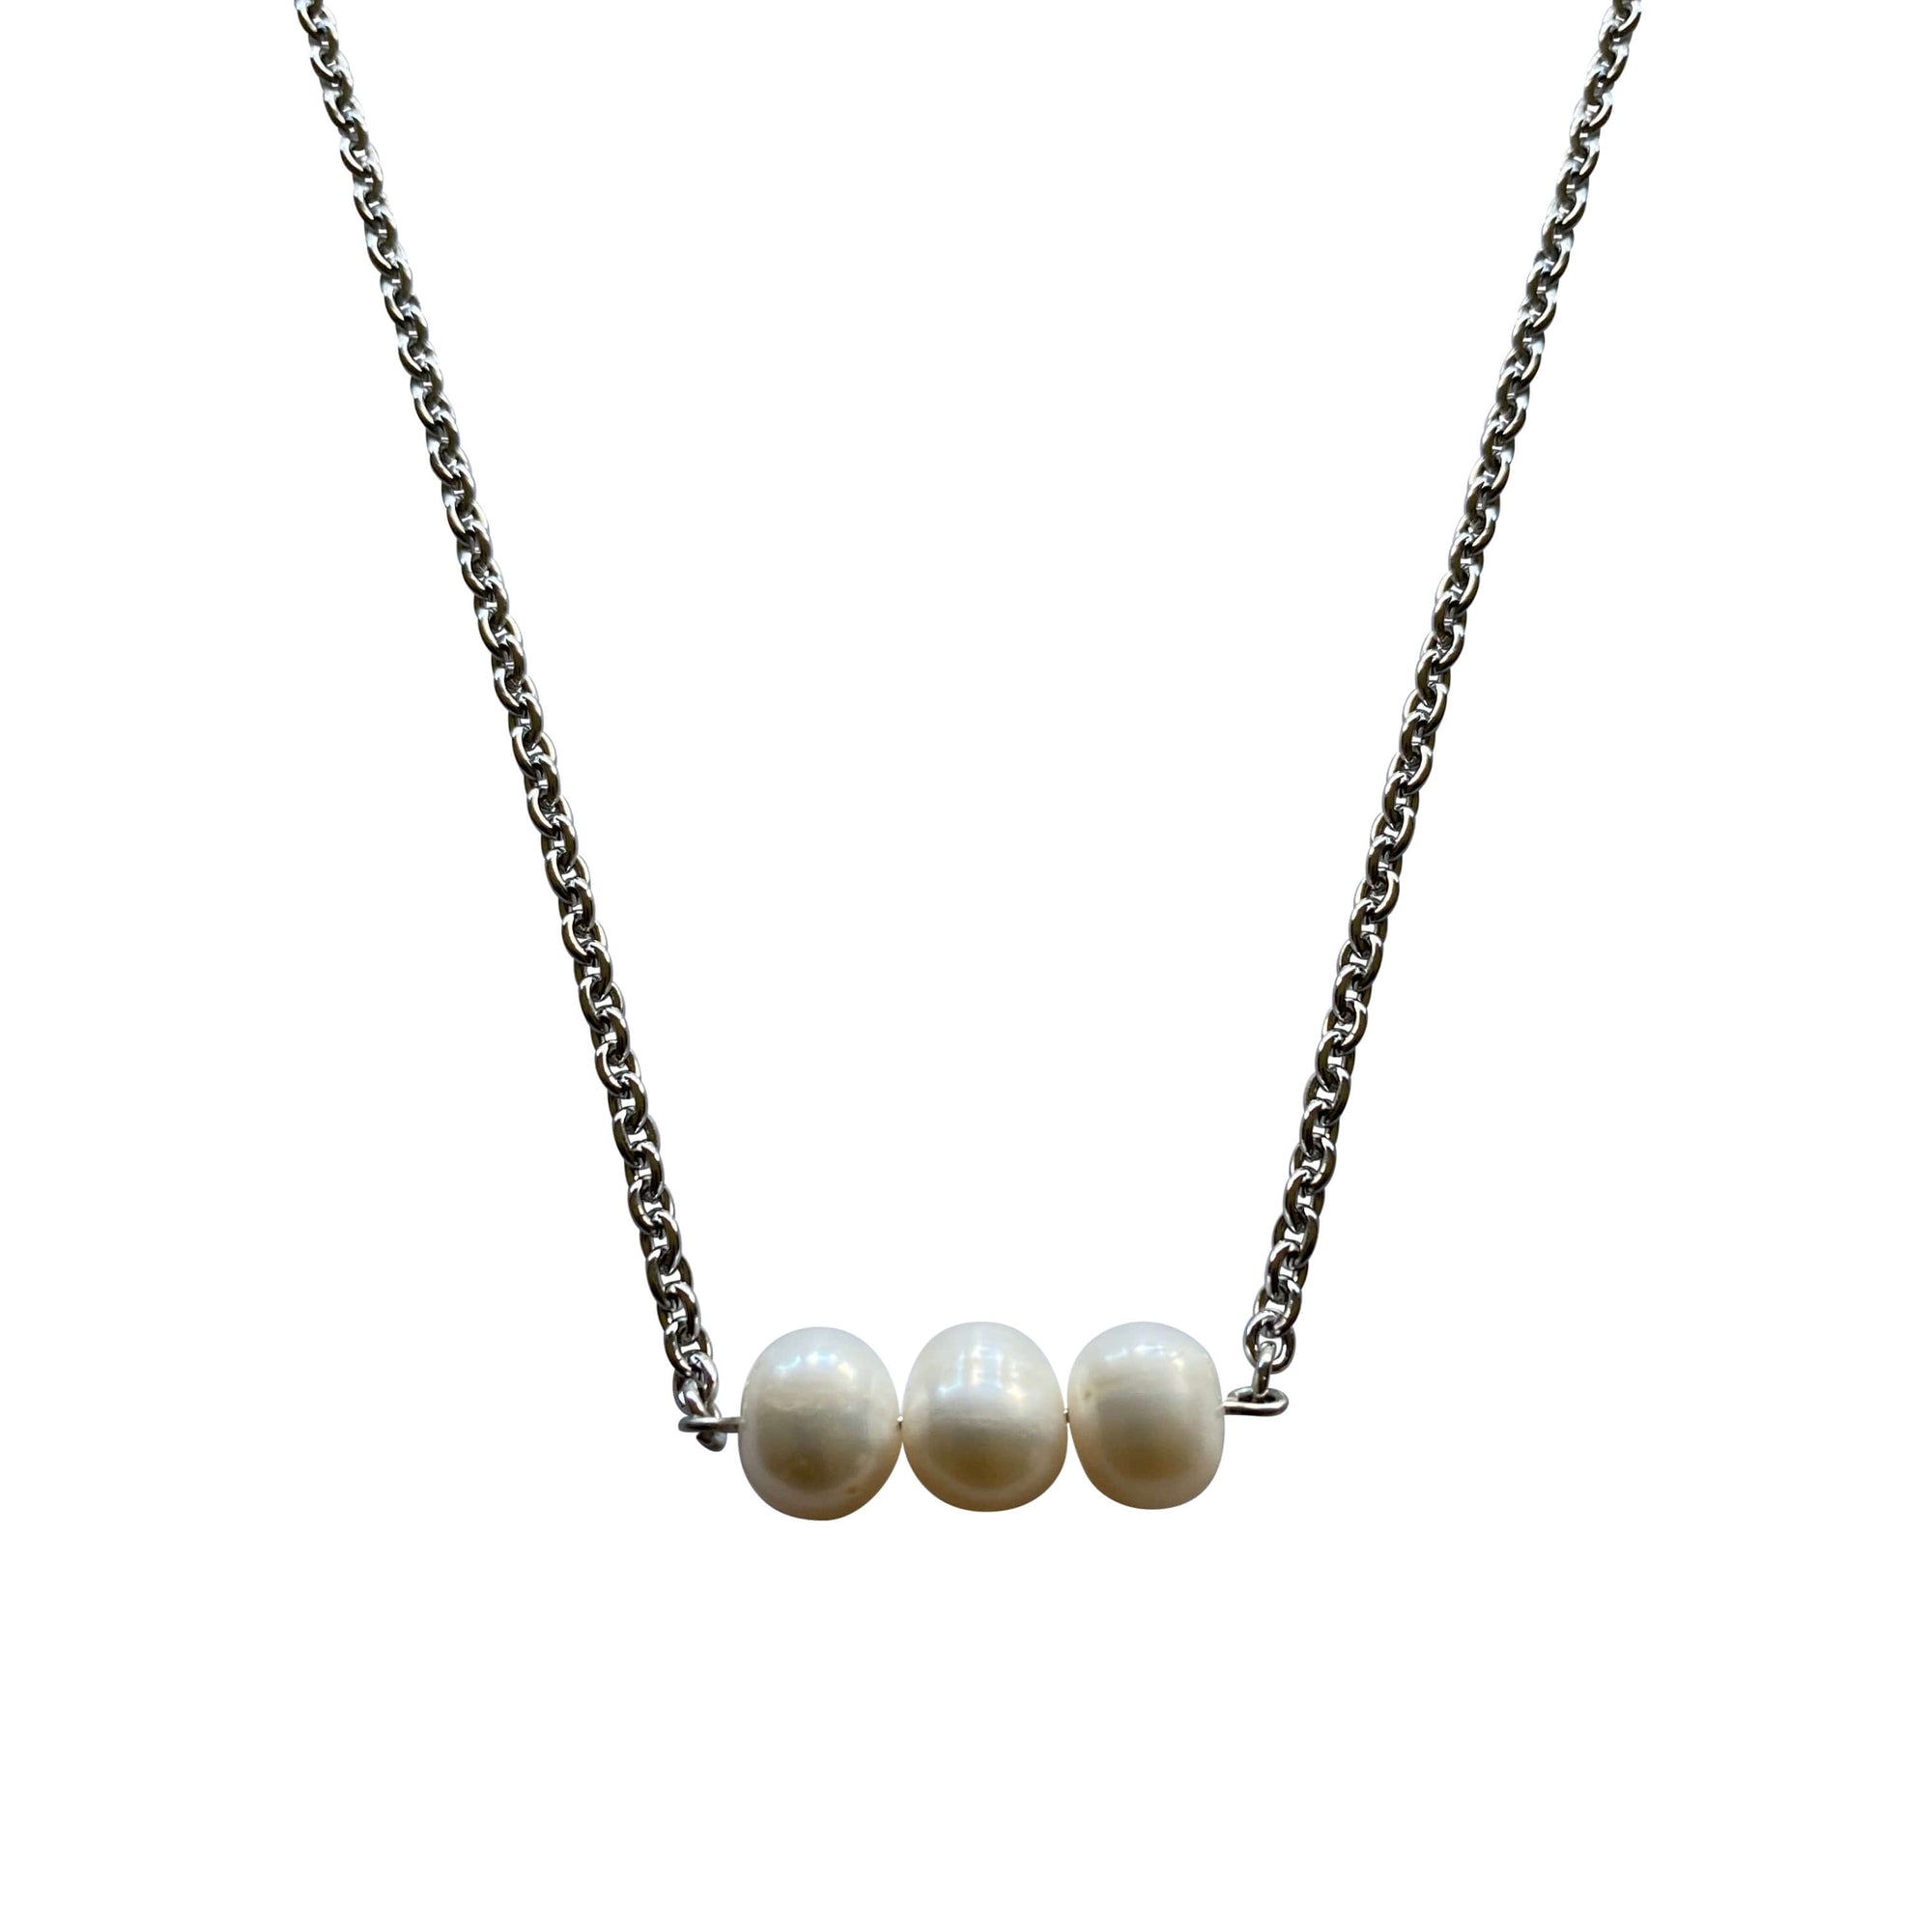 Three Freshwater Pearls Bar Pendant Necklace with Lobster Clasp-Necklaces- Creative Jewelry by Marcia